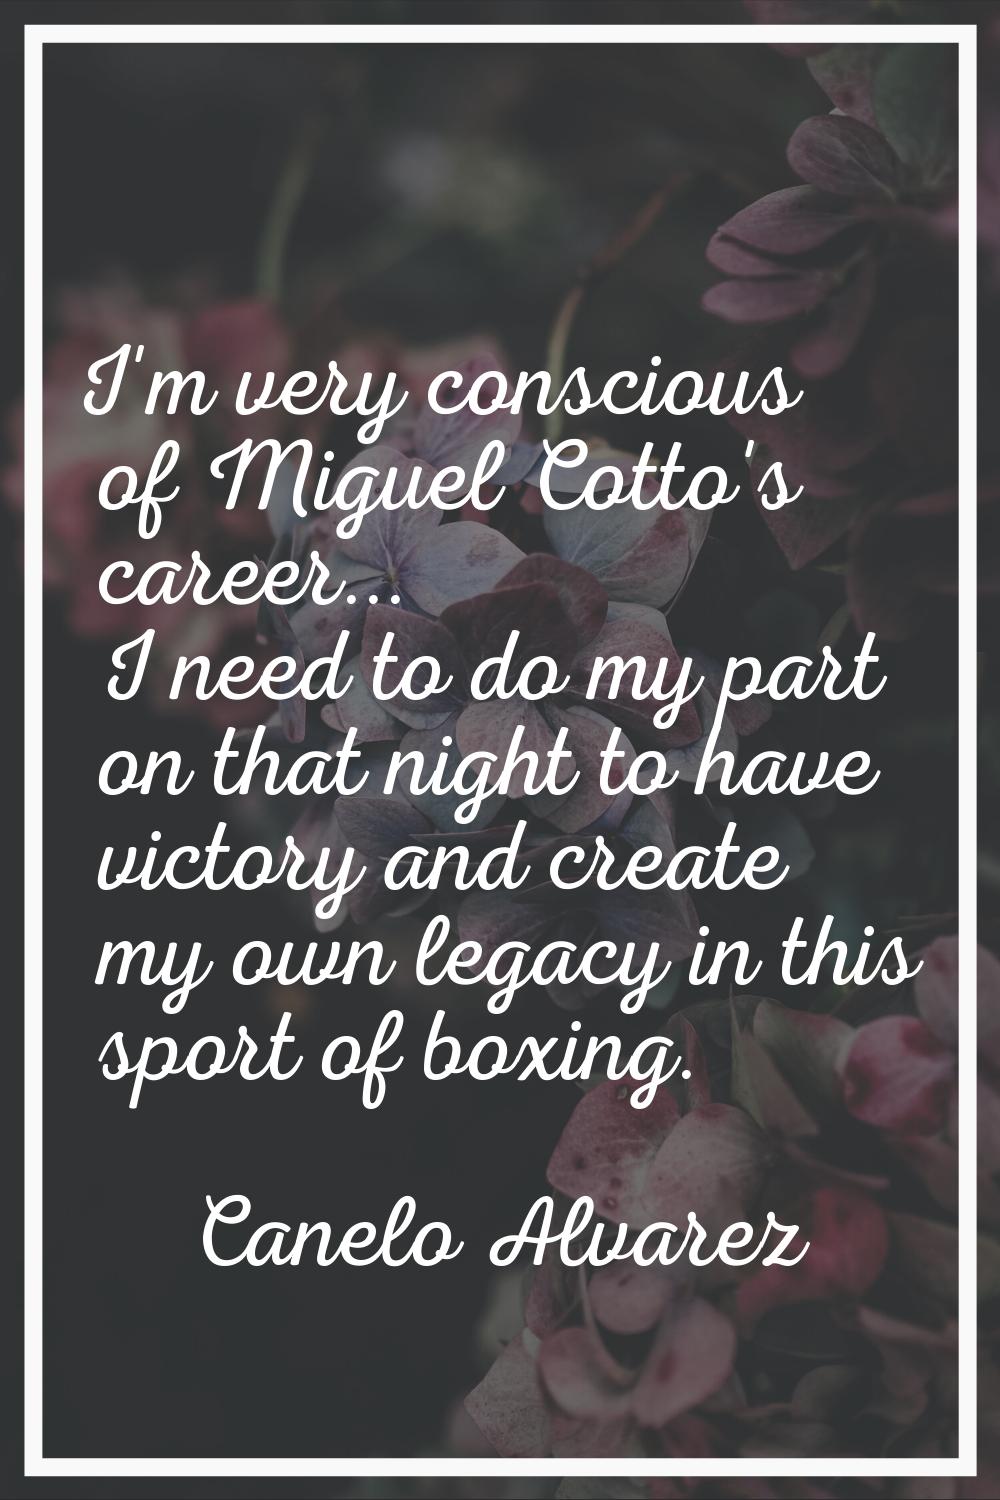 I'm very conscious of Miguel Cotto's career... I need to do my part on that night to have victory a